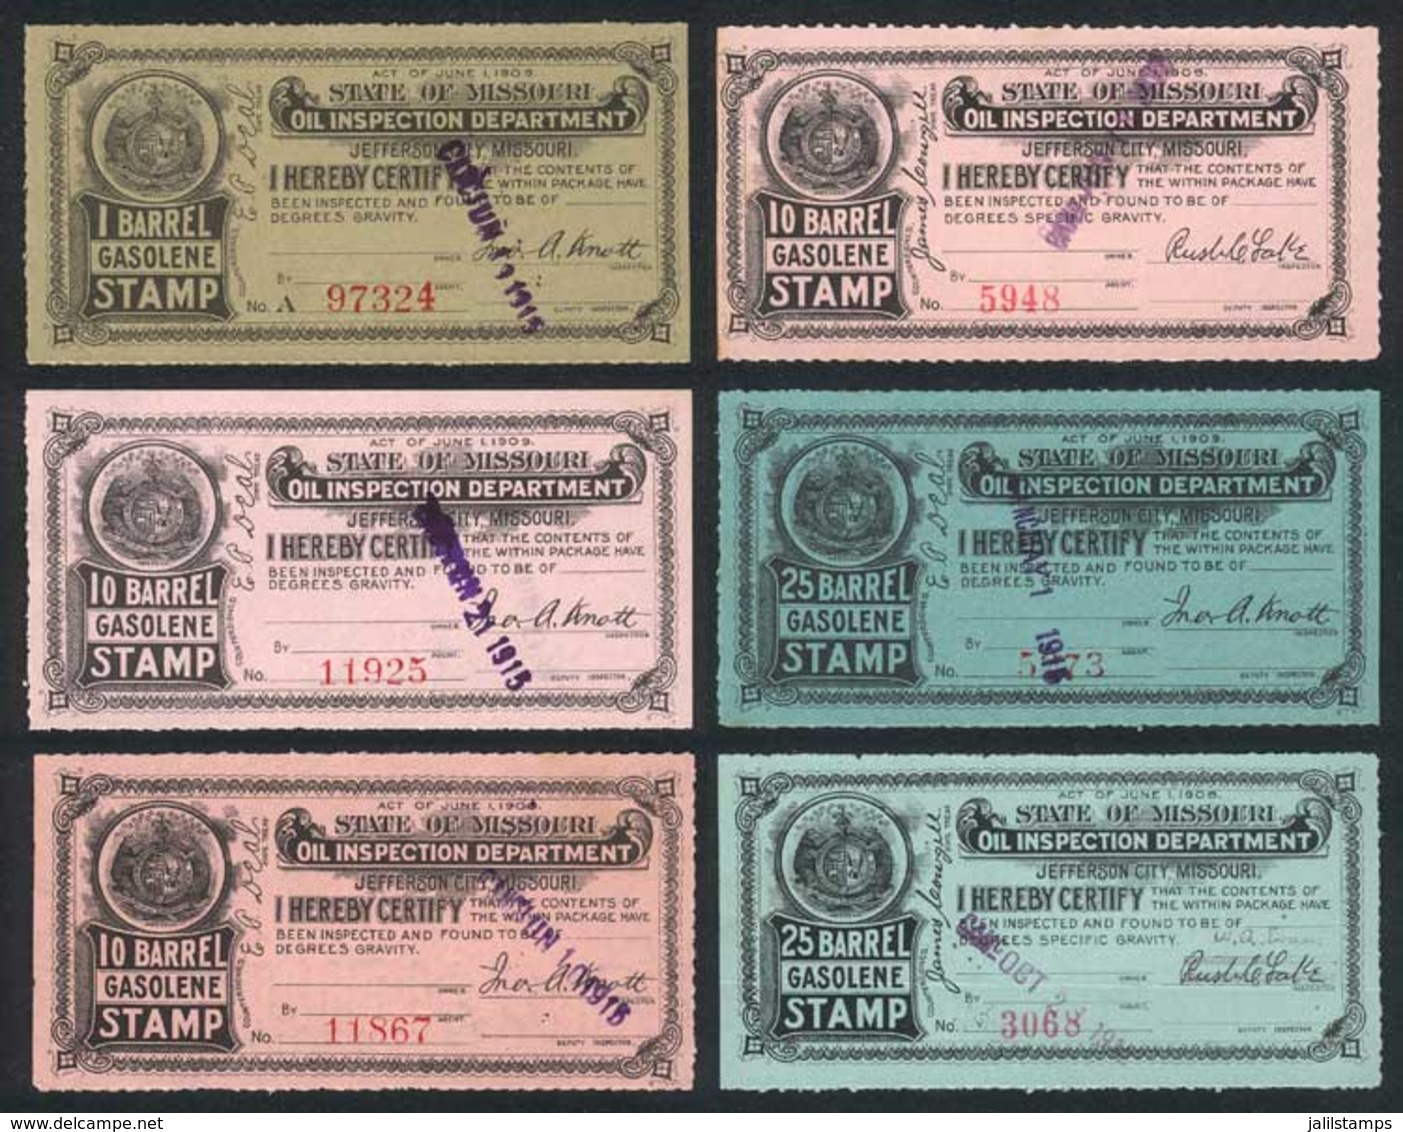 UNITED STATES: MISSOURI: Gasoline Inspection Stamps, Circa 1915, 6 Stamps Between 1 Bbl And 25 Bbl, Fine To VF Quality,  - Steuermarken